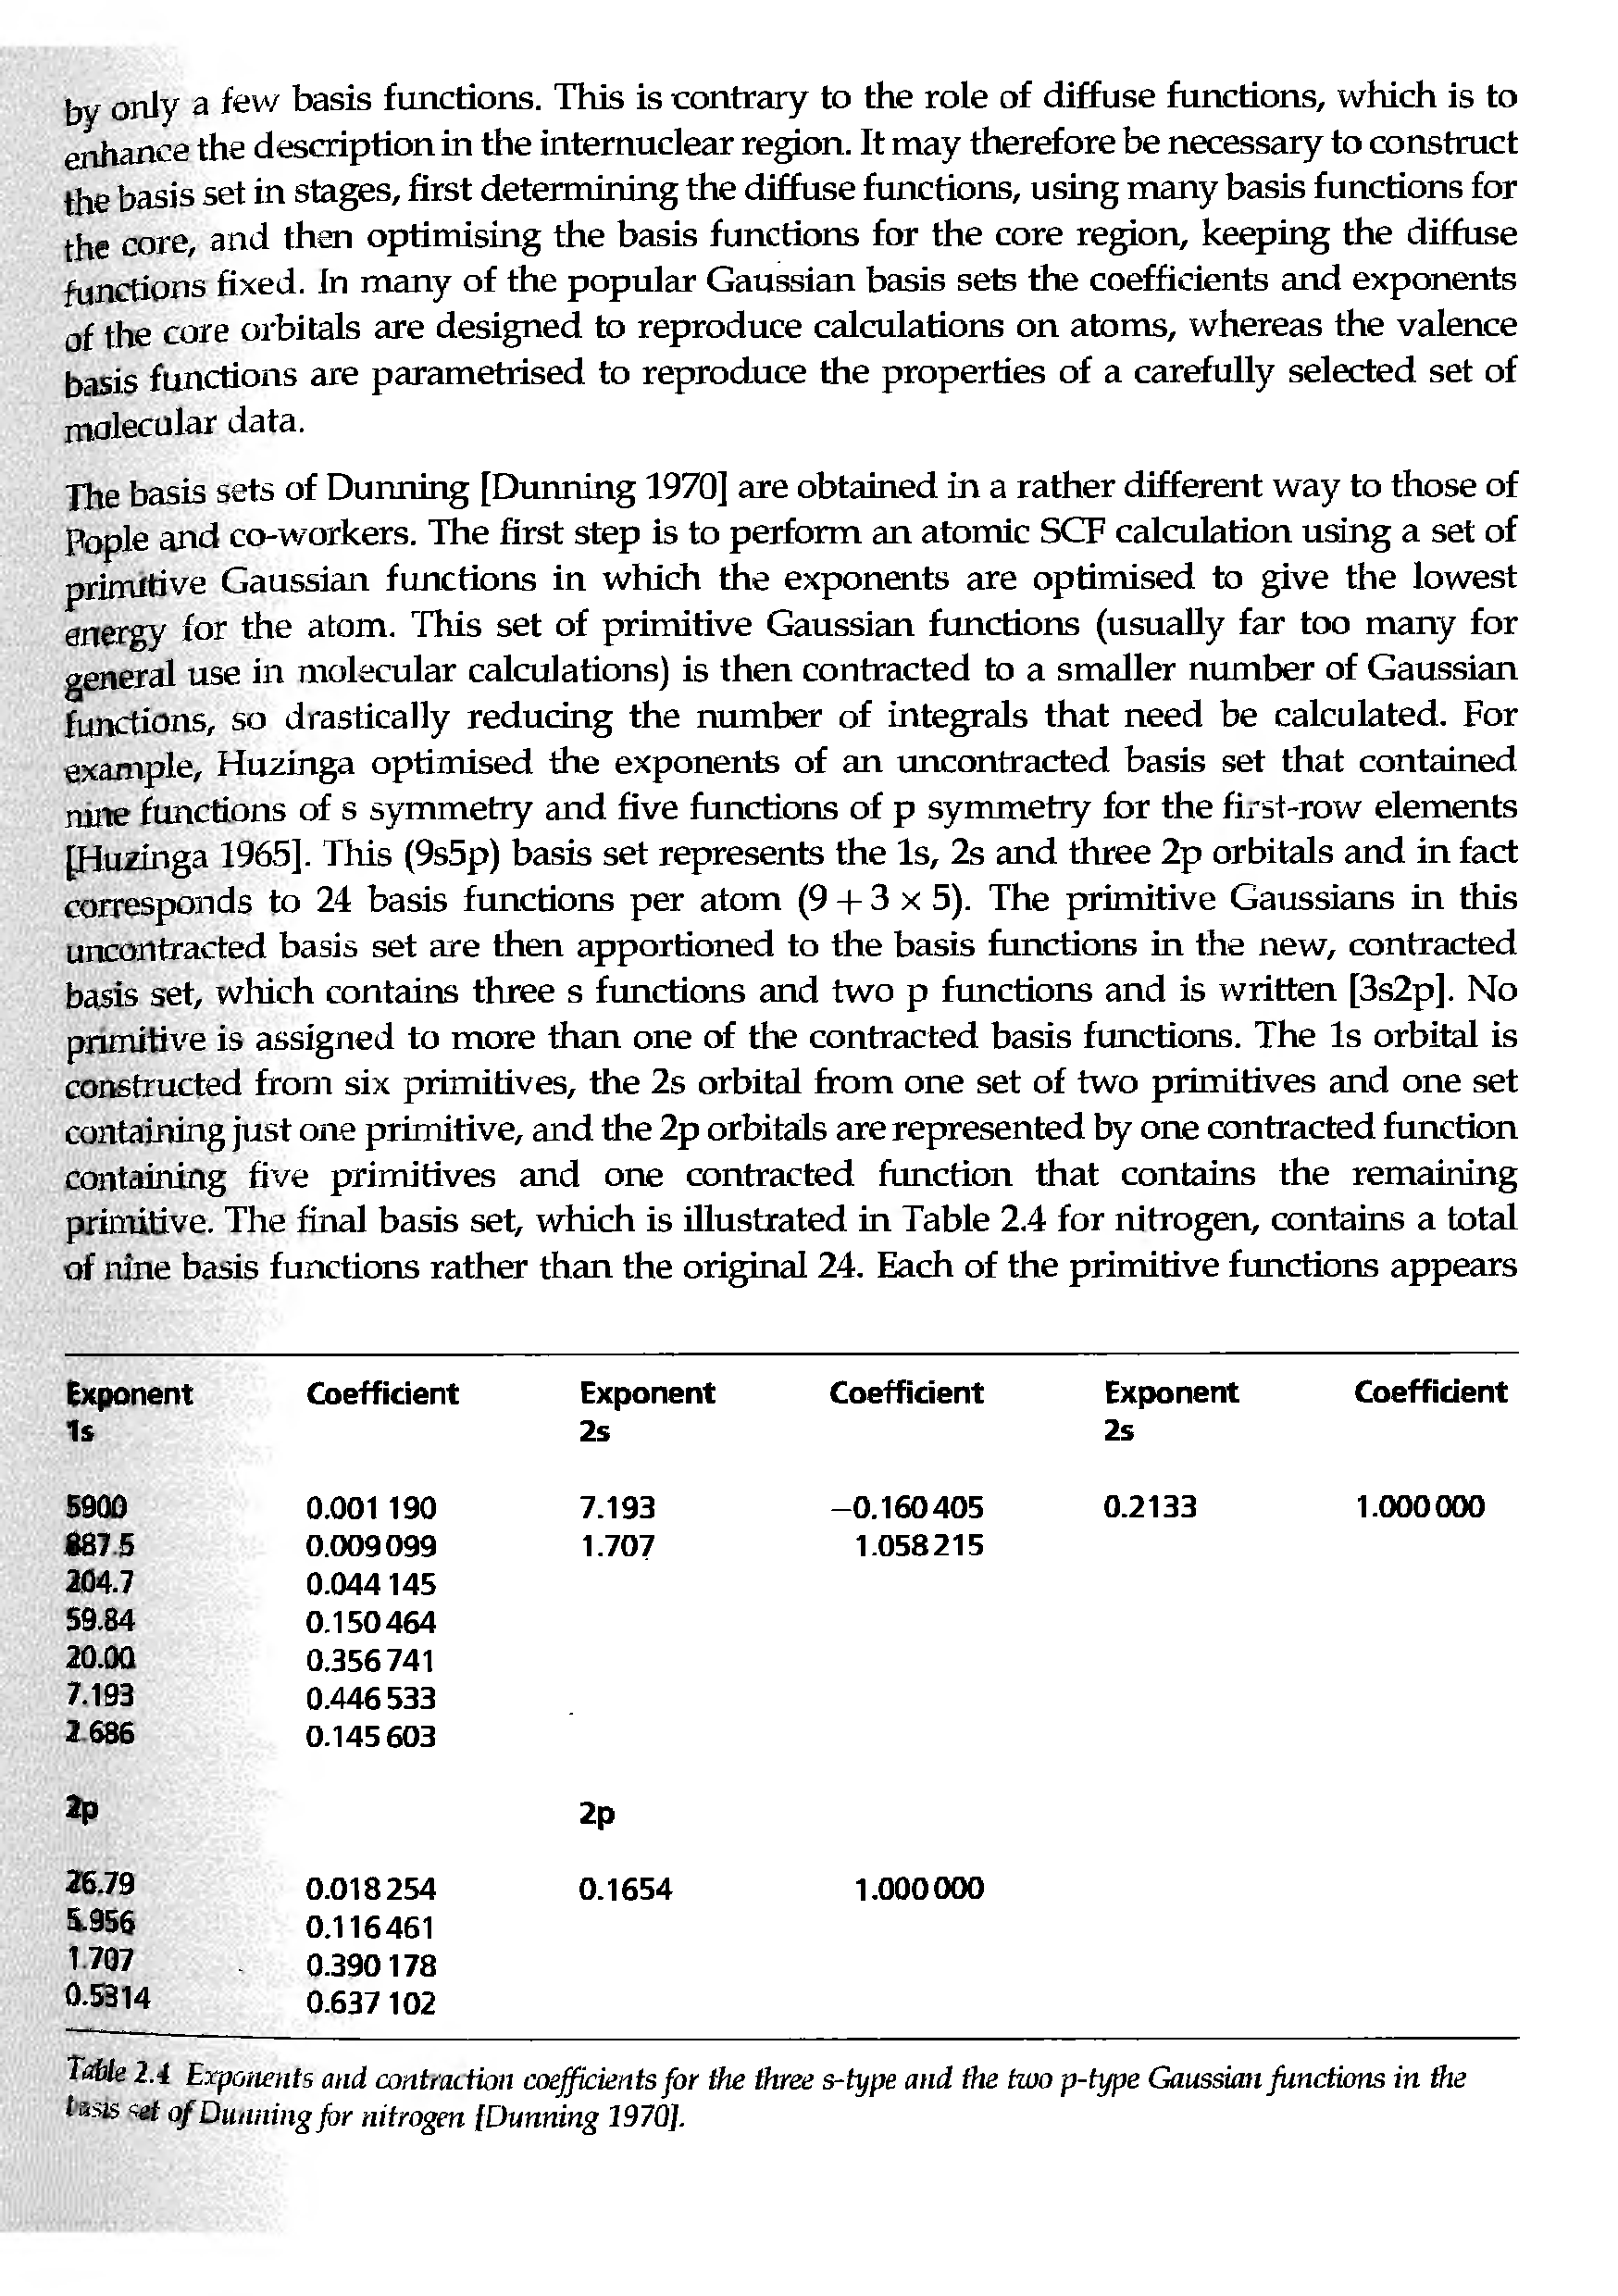 Table 1.4 Erpotients and contiaction coefficients for the three s-type and the two p-type Gaussian functions in the t >is s t of Dunning far nitrogen Dunning 1970],...